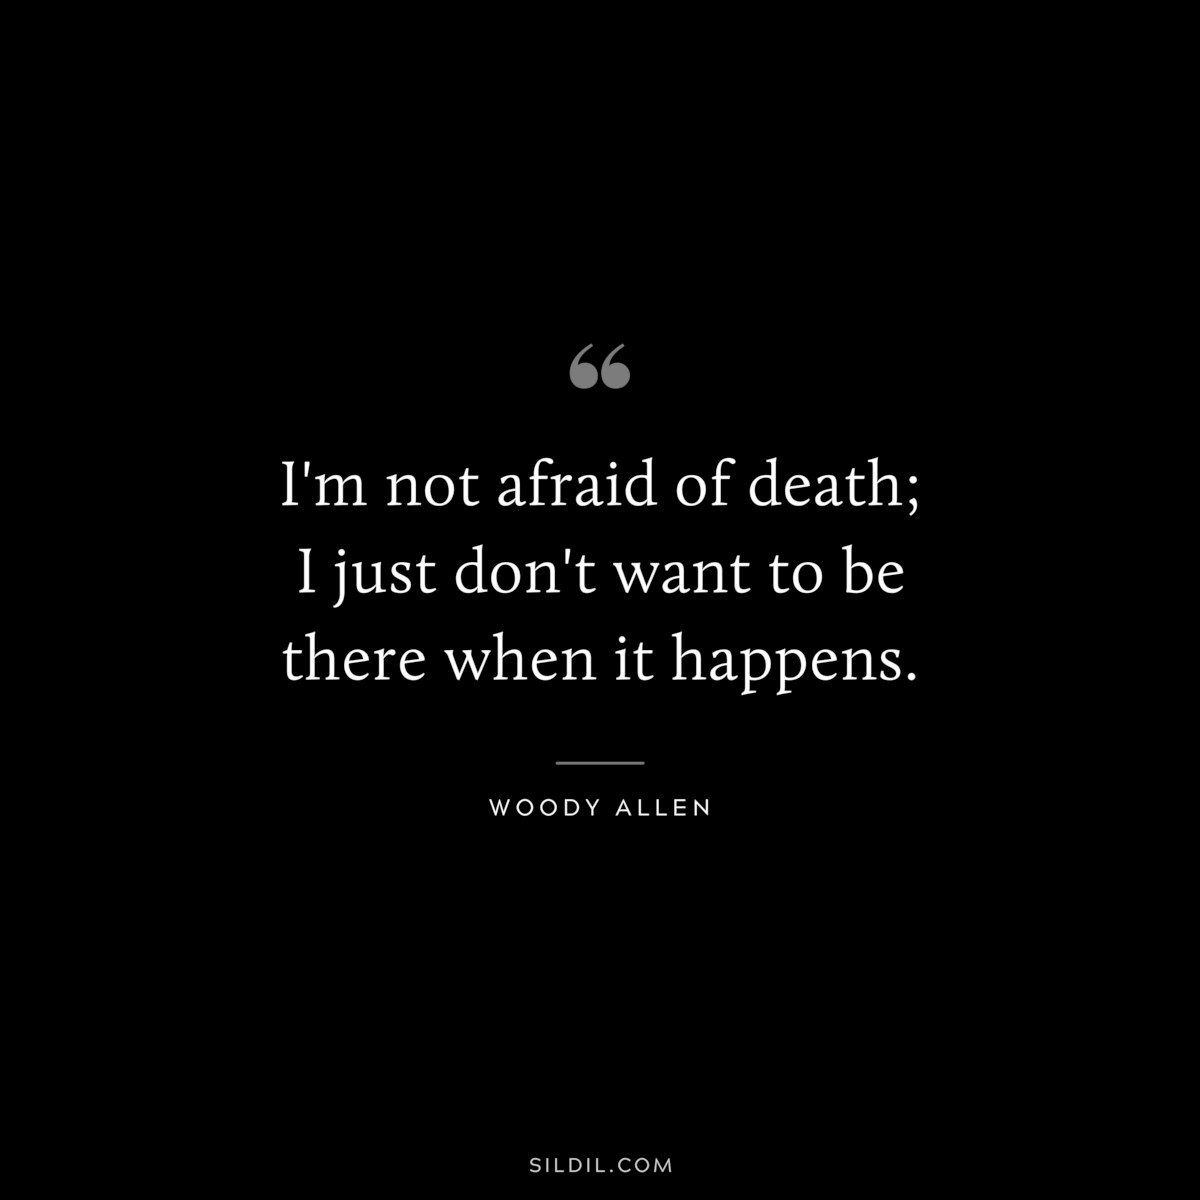 I'm not afraid of death; I just don't want to be there when it happens. ― Woody Allen